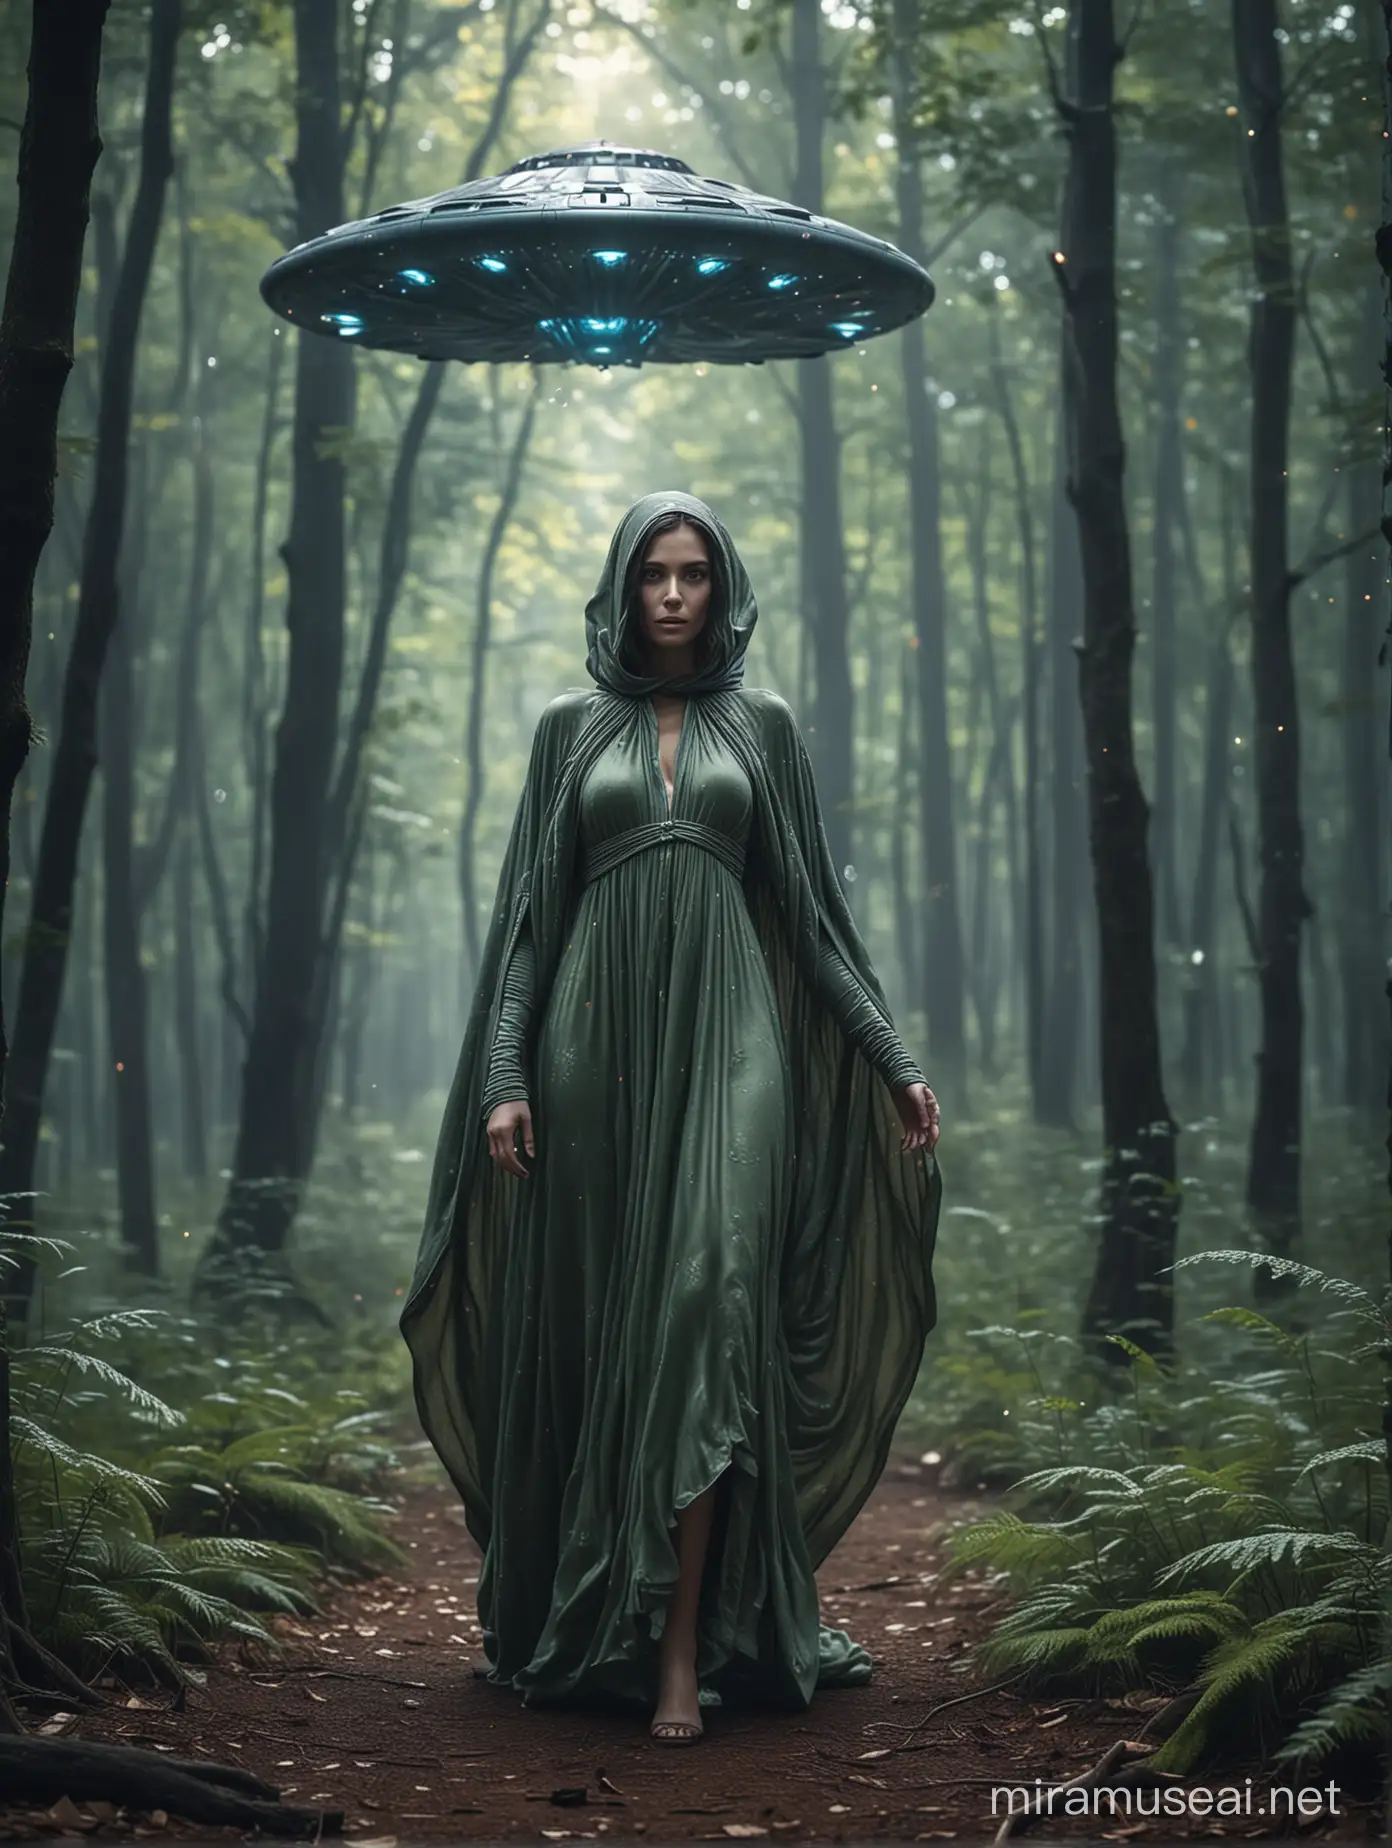 Extraterrestrial Women Descend in Enchanted Forest with Ethereal Attire